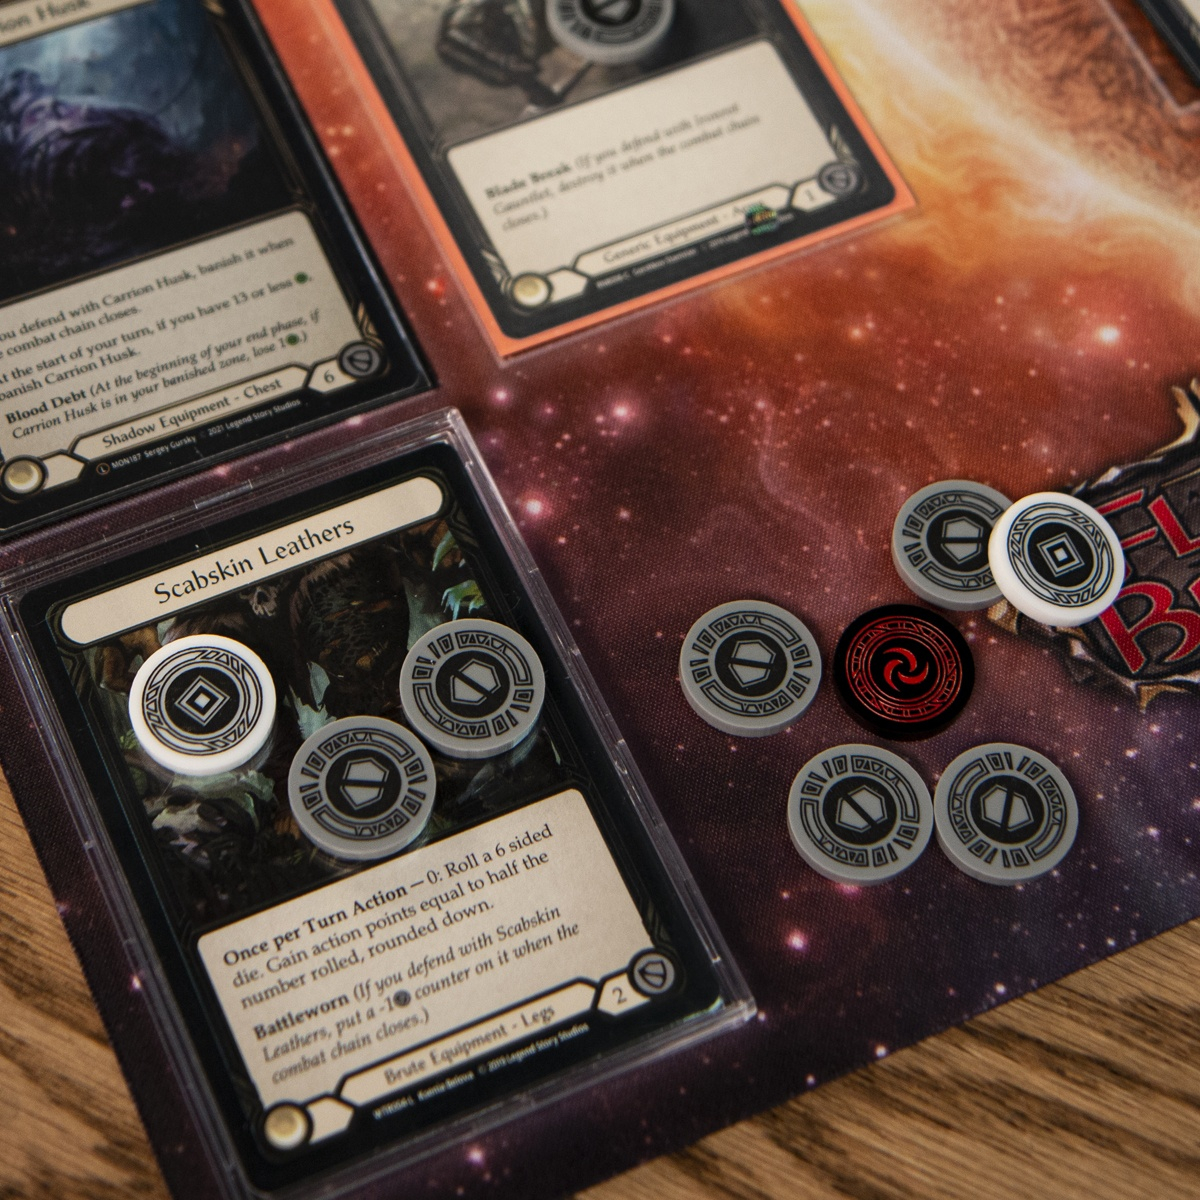 Flesh and Blood TCG equipment cards laid out for gameplay with one Activation Token and two Armor Tokens on the card Scabskin Leathers. An assortment of additional Majestic Tokens waits to be used nearby.